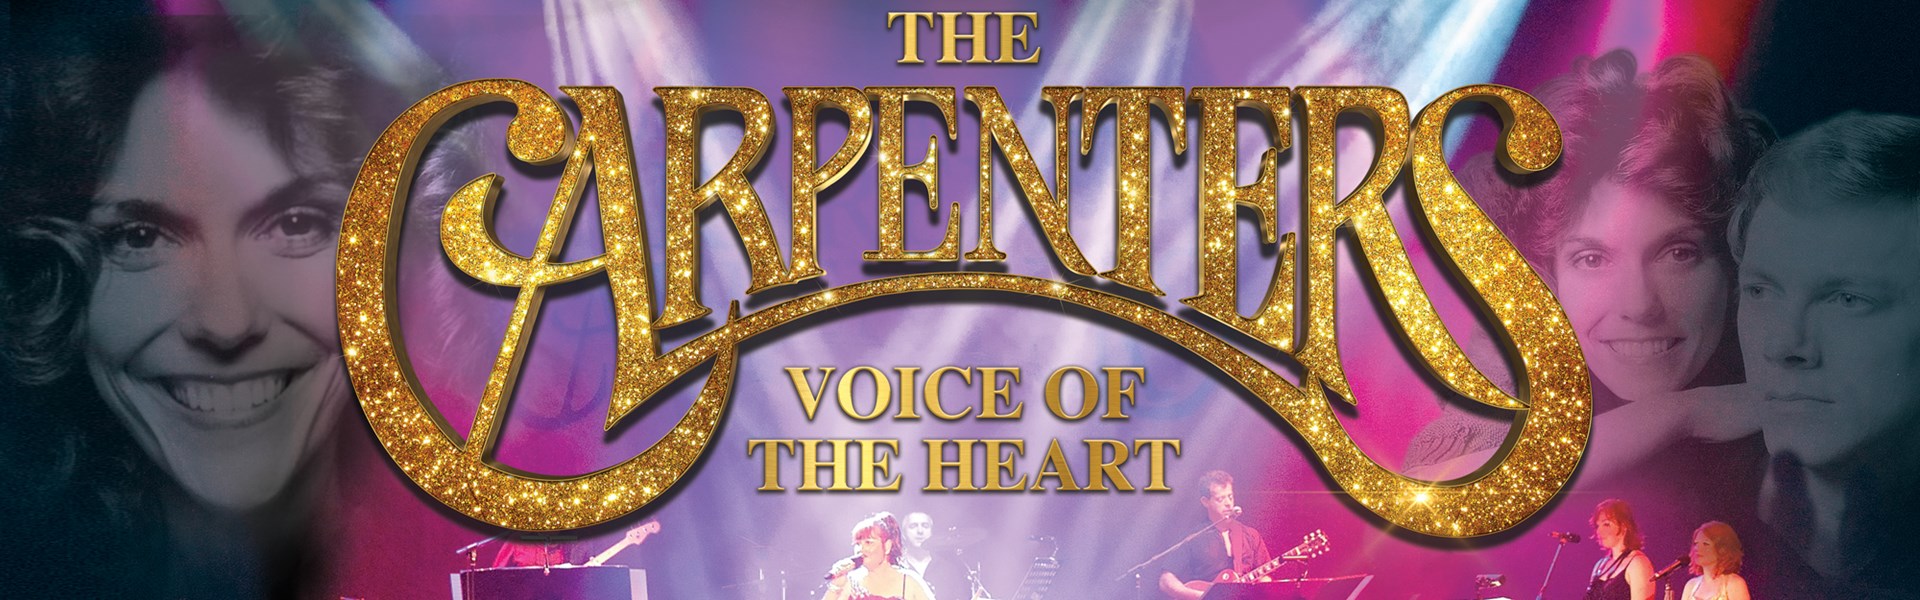 The Carpenters: Voice of the Heart